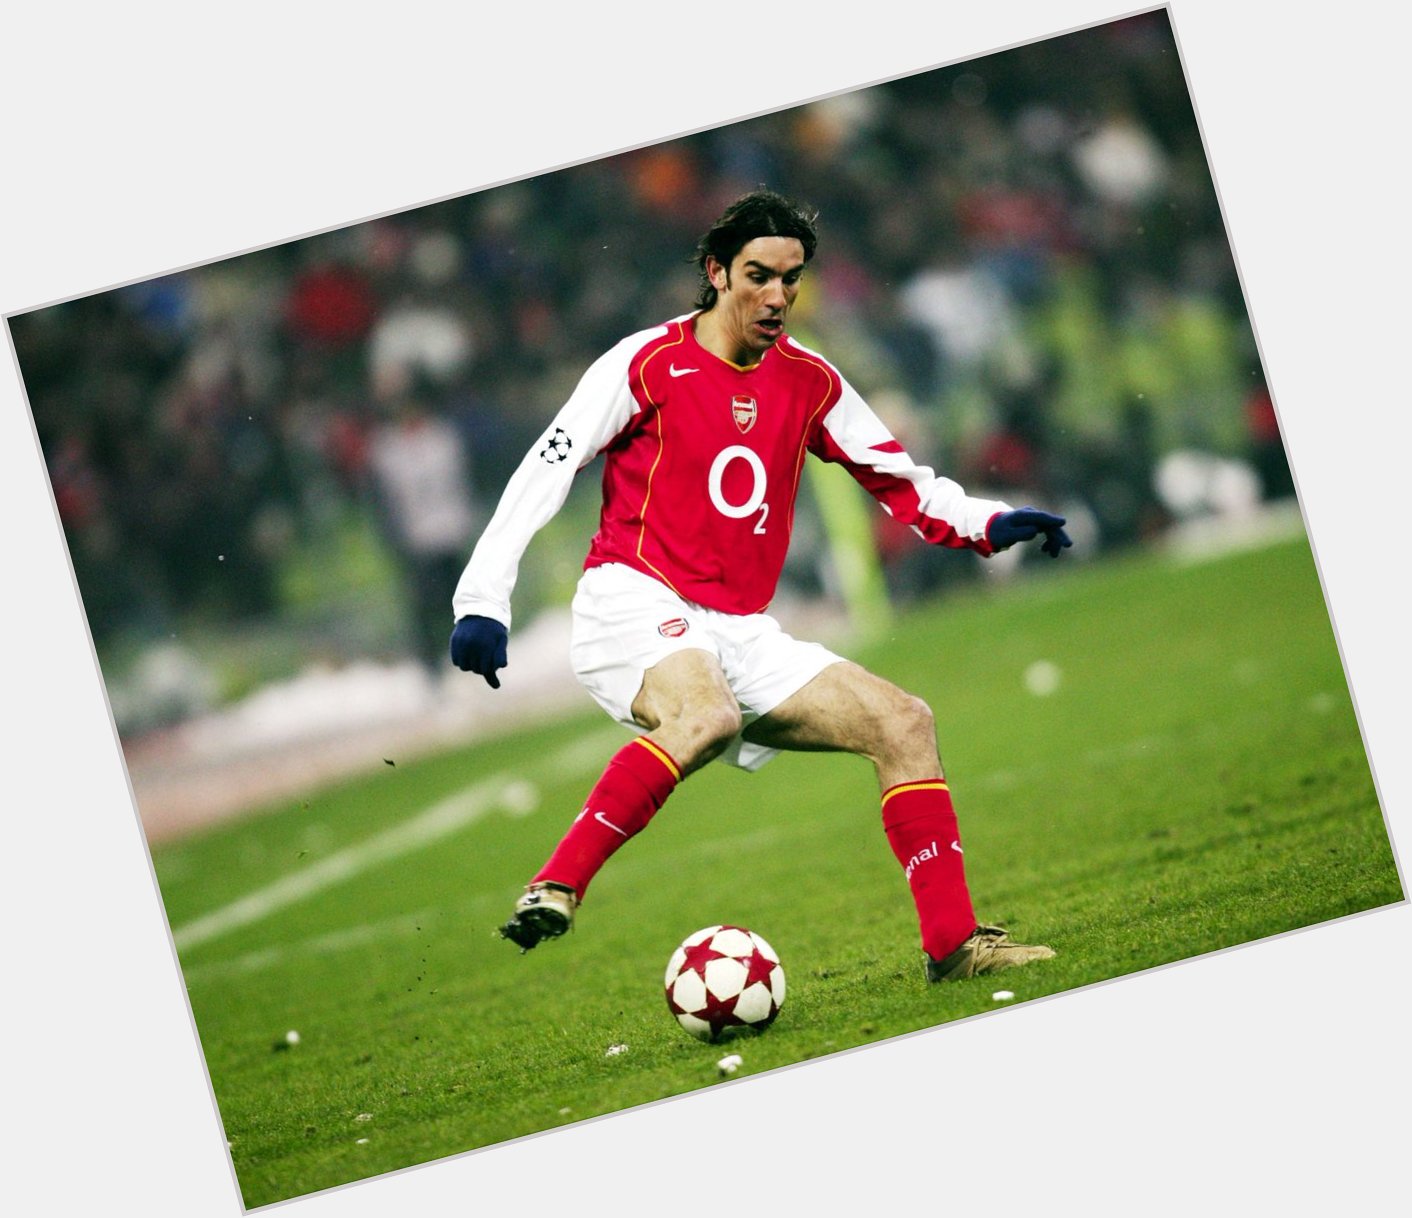 One of the greats and technically gifted player to ever play in the prem.

Happy Birthday Robert Pires 